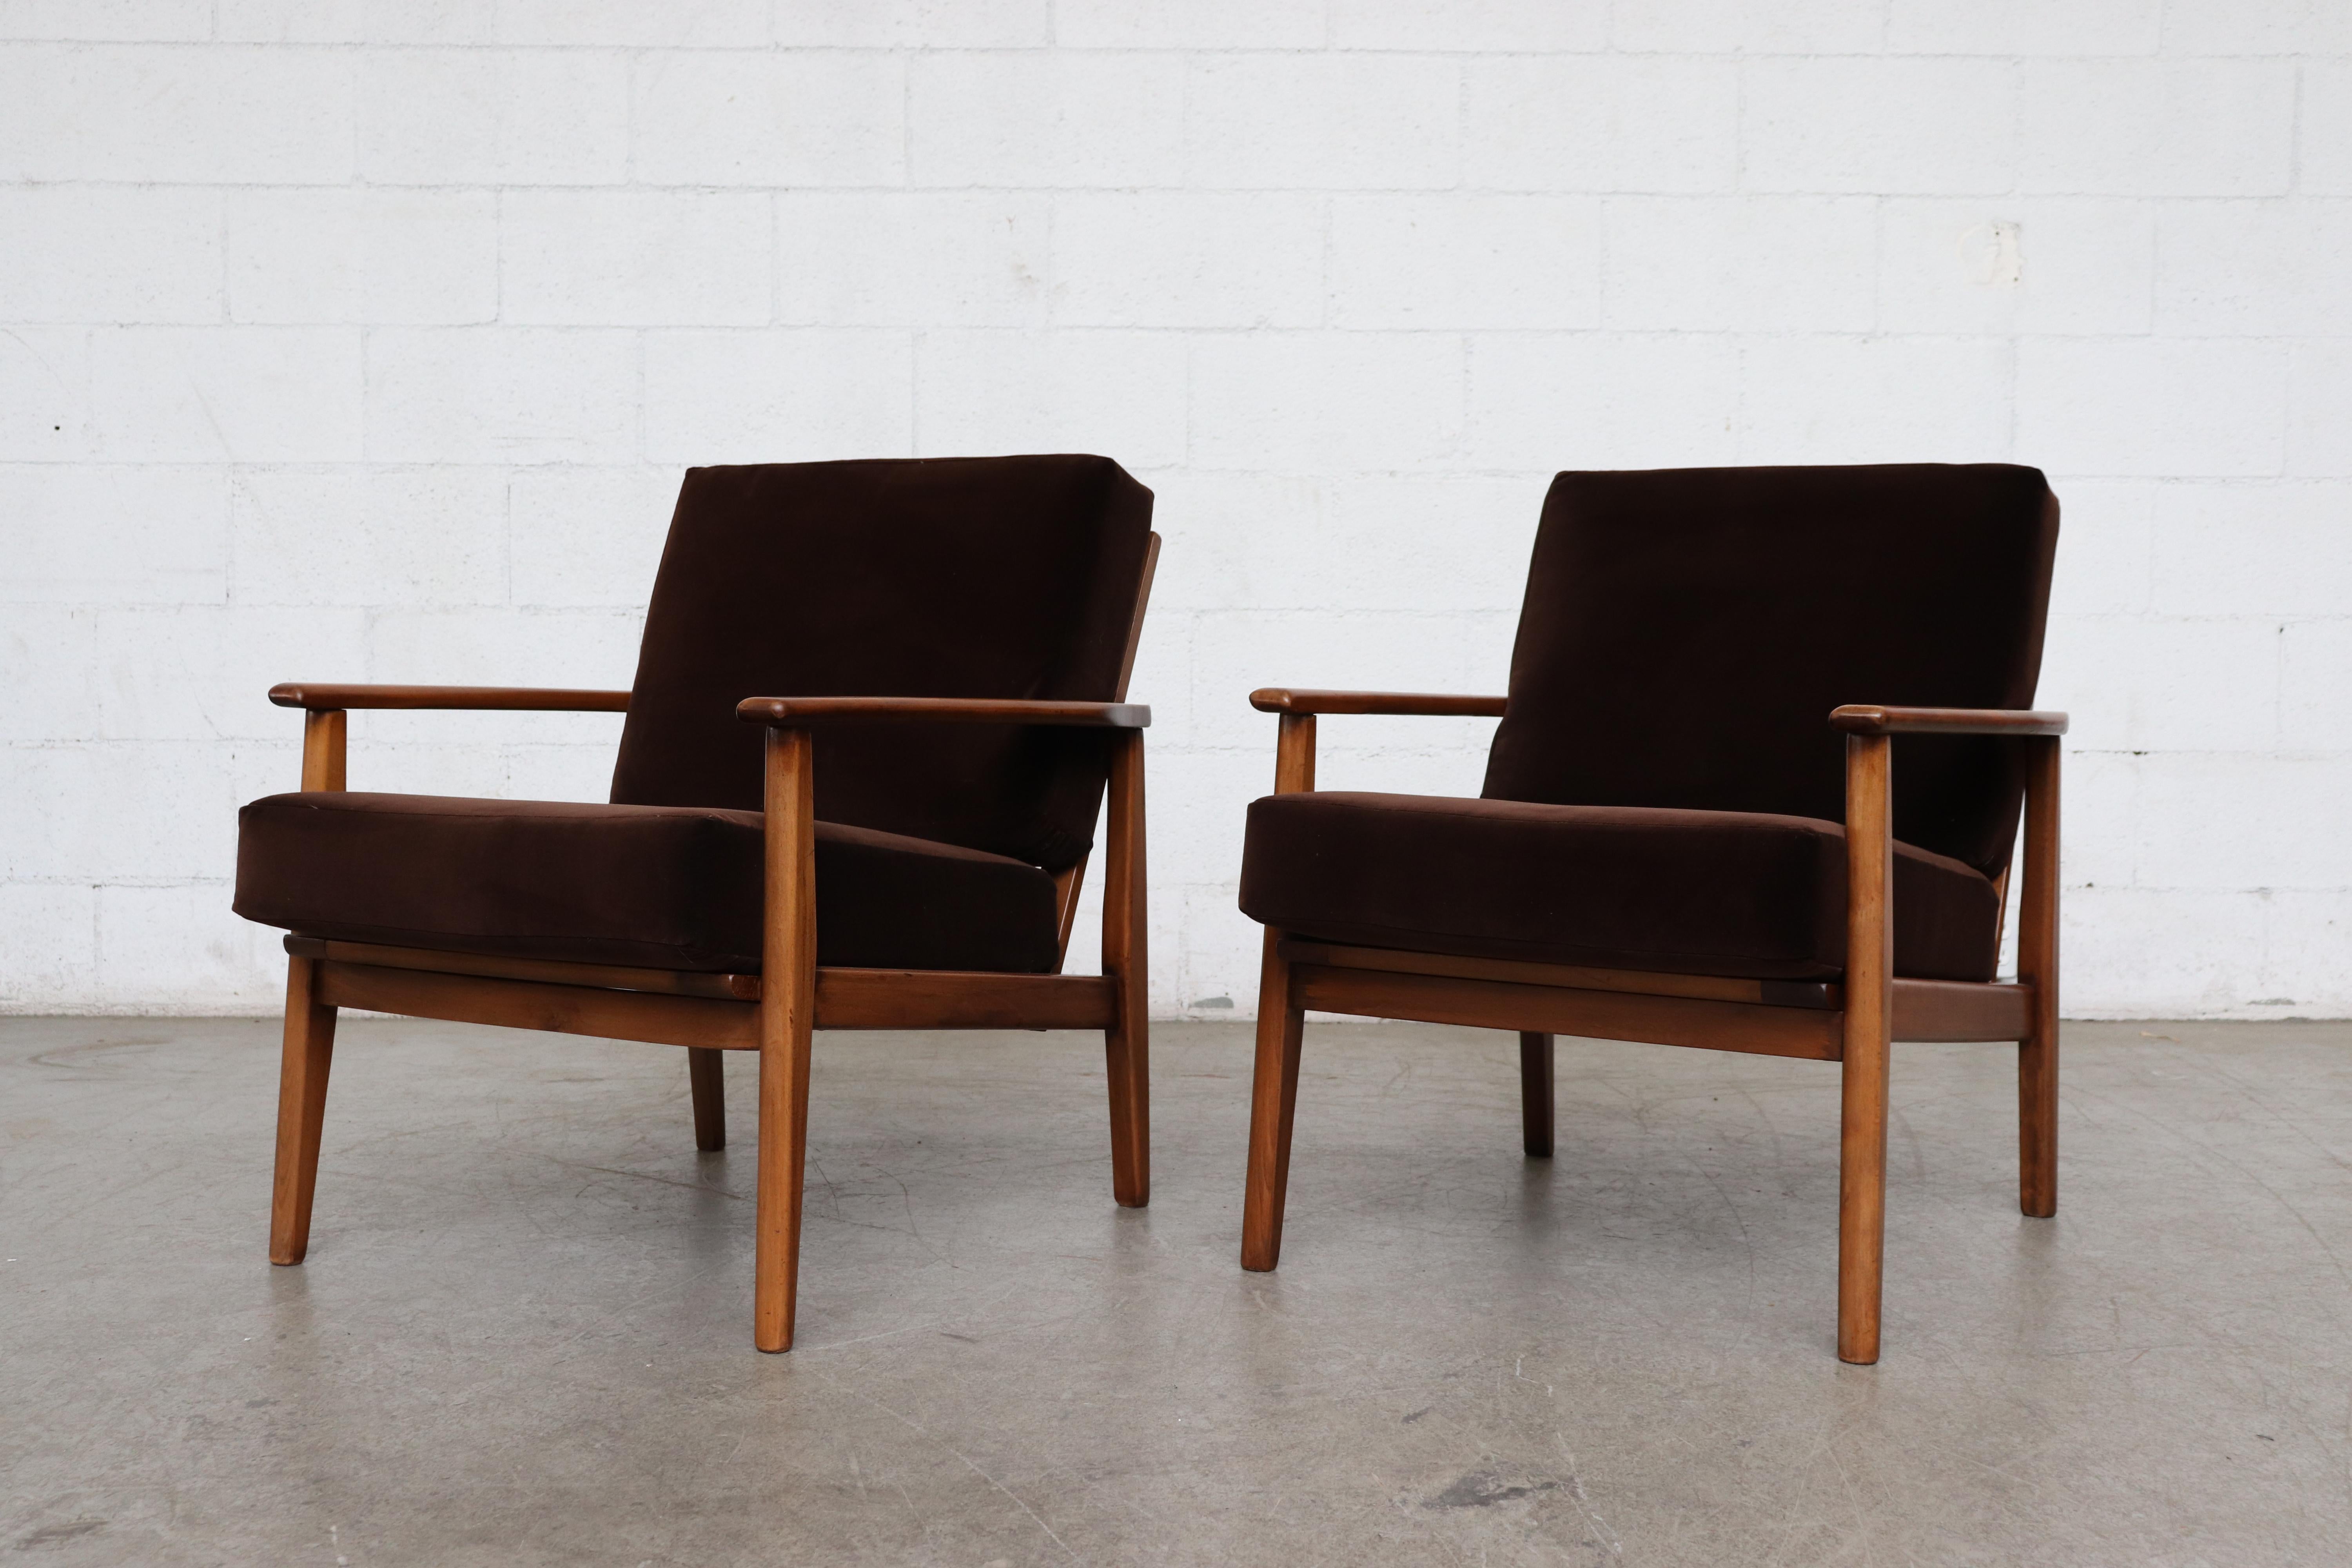 Pair of Danish midcentury lounge chairs with beautiful lightly refinished teak frames and newly upholstered dark chocolate velvet cushions. Good original condition, set price.